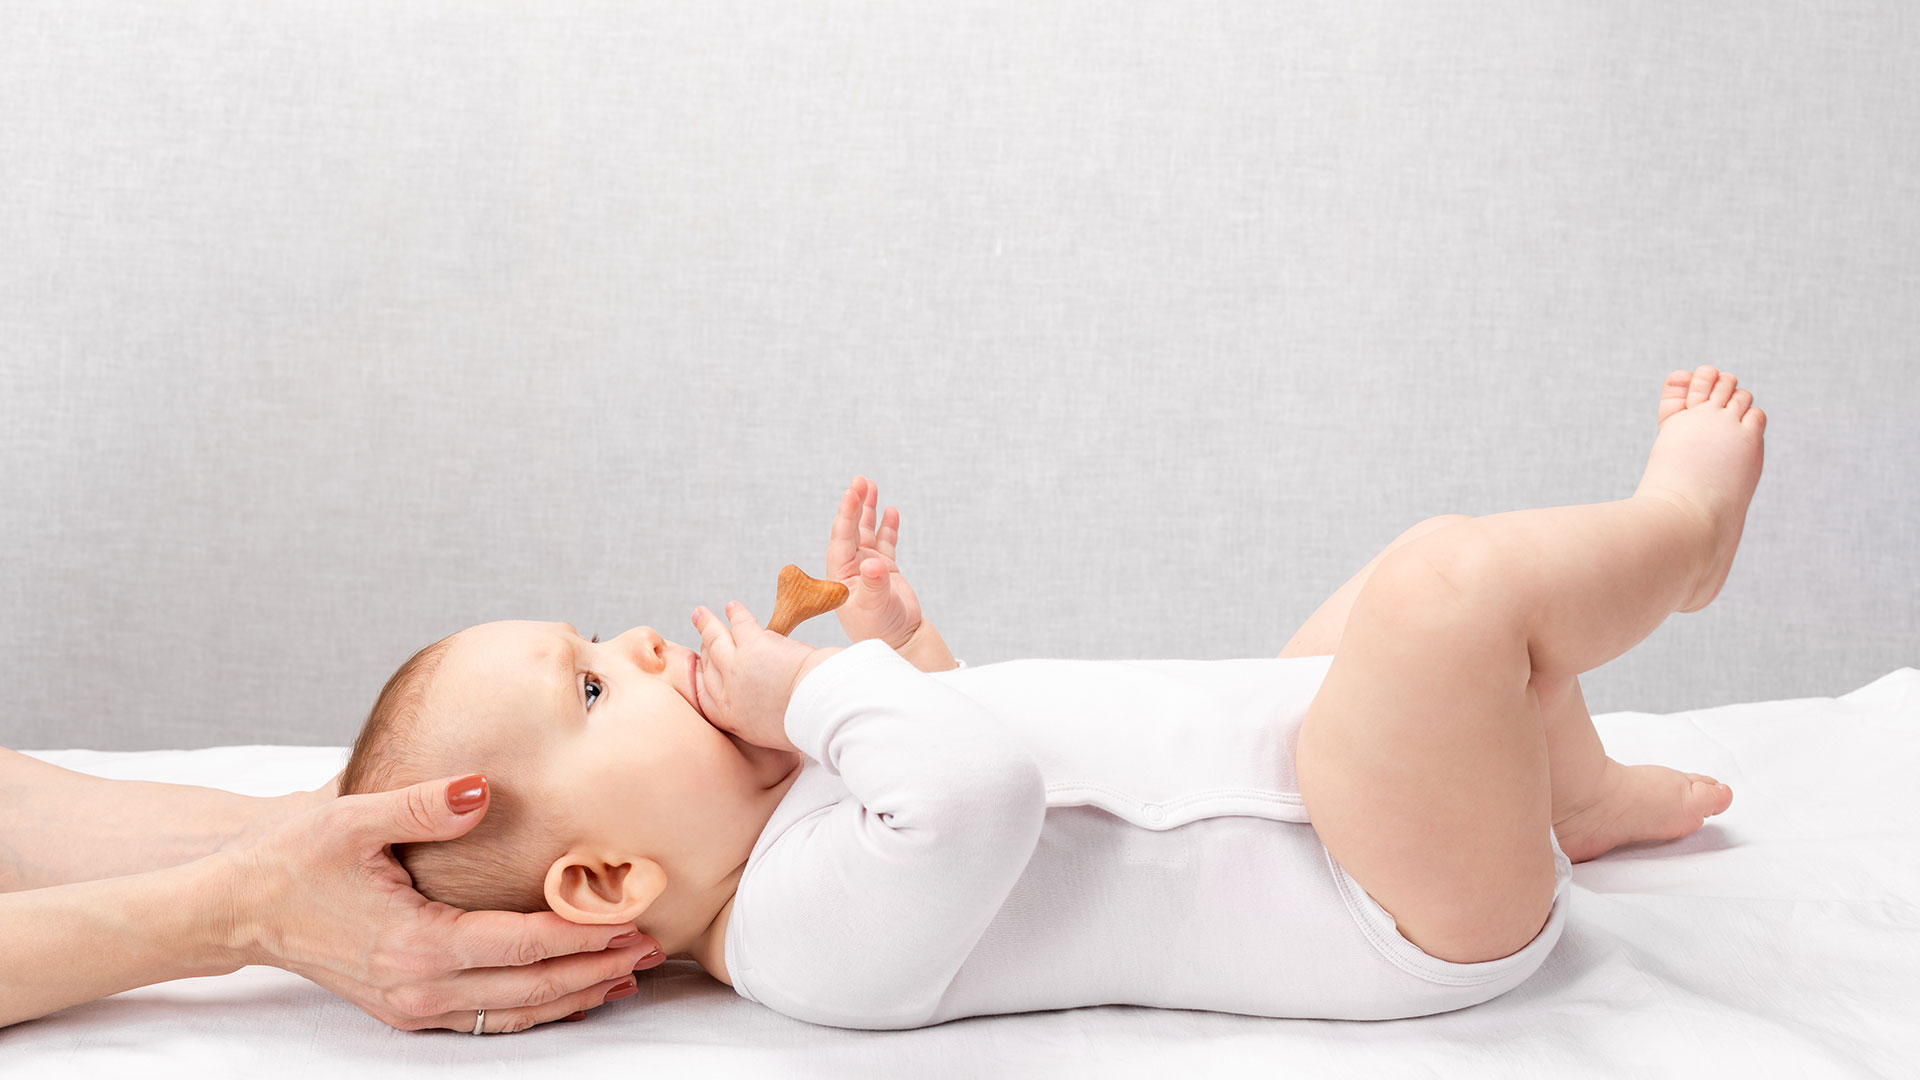 Paediatric Osteopathy: What it is, who it is for, and benefits